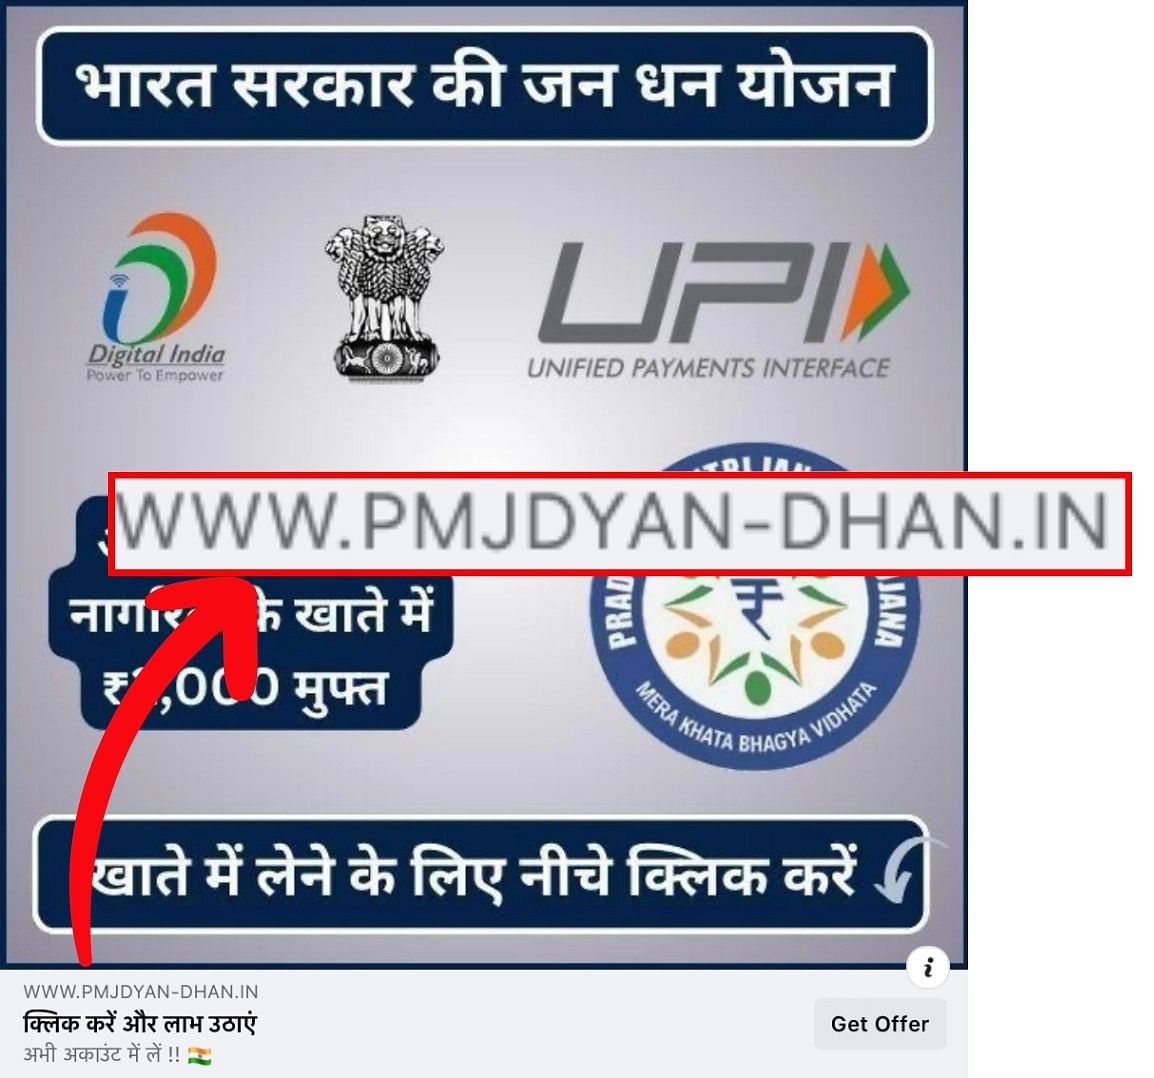 The link is a bogus one. There is no official announcement about people receiving ₹2,000 under PMJDY.